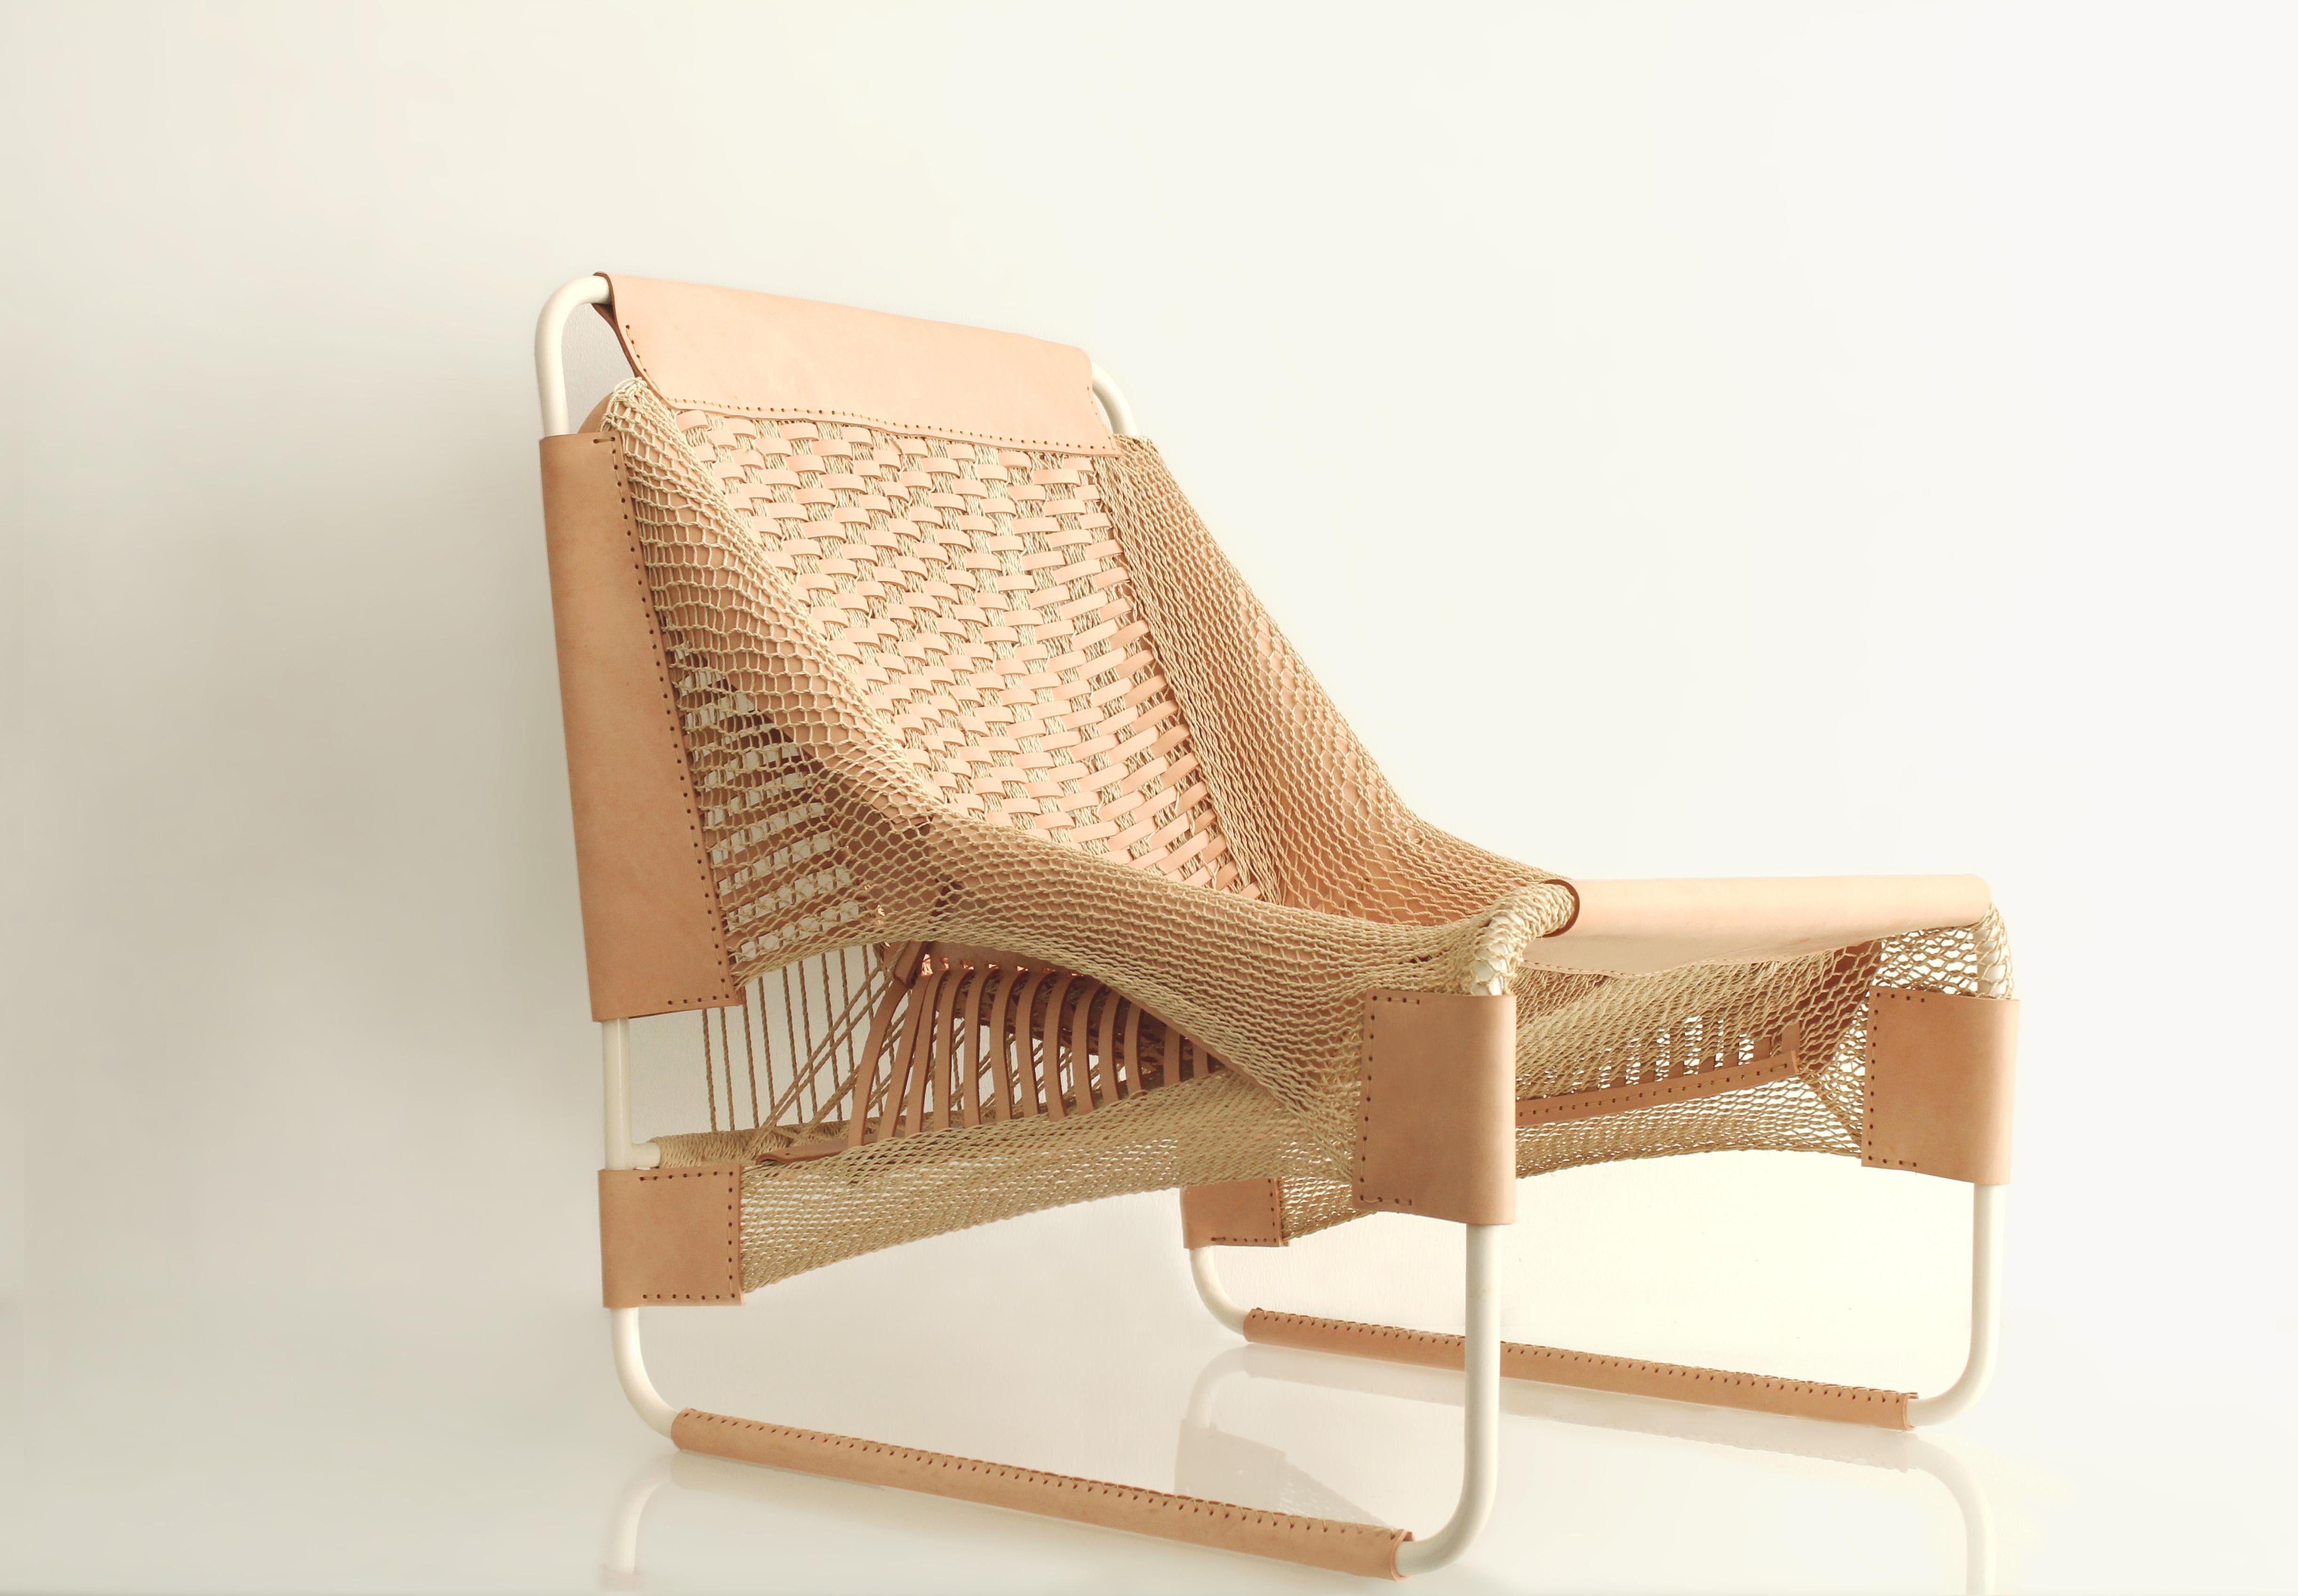 Selva armchair by Anabella Georgi
Dimensions: D 72 x W 62 x H 66 cm 
Materials: Natural Moriche Fiber made by Venezuela elaborated by the Etnia Warao, Leather, steel.
Technique: Hand-Woven. Hand-made.
Each piece can have possible variations